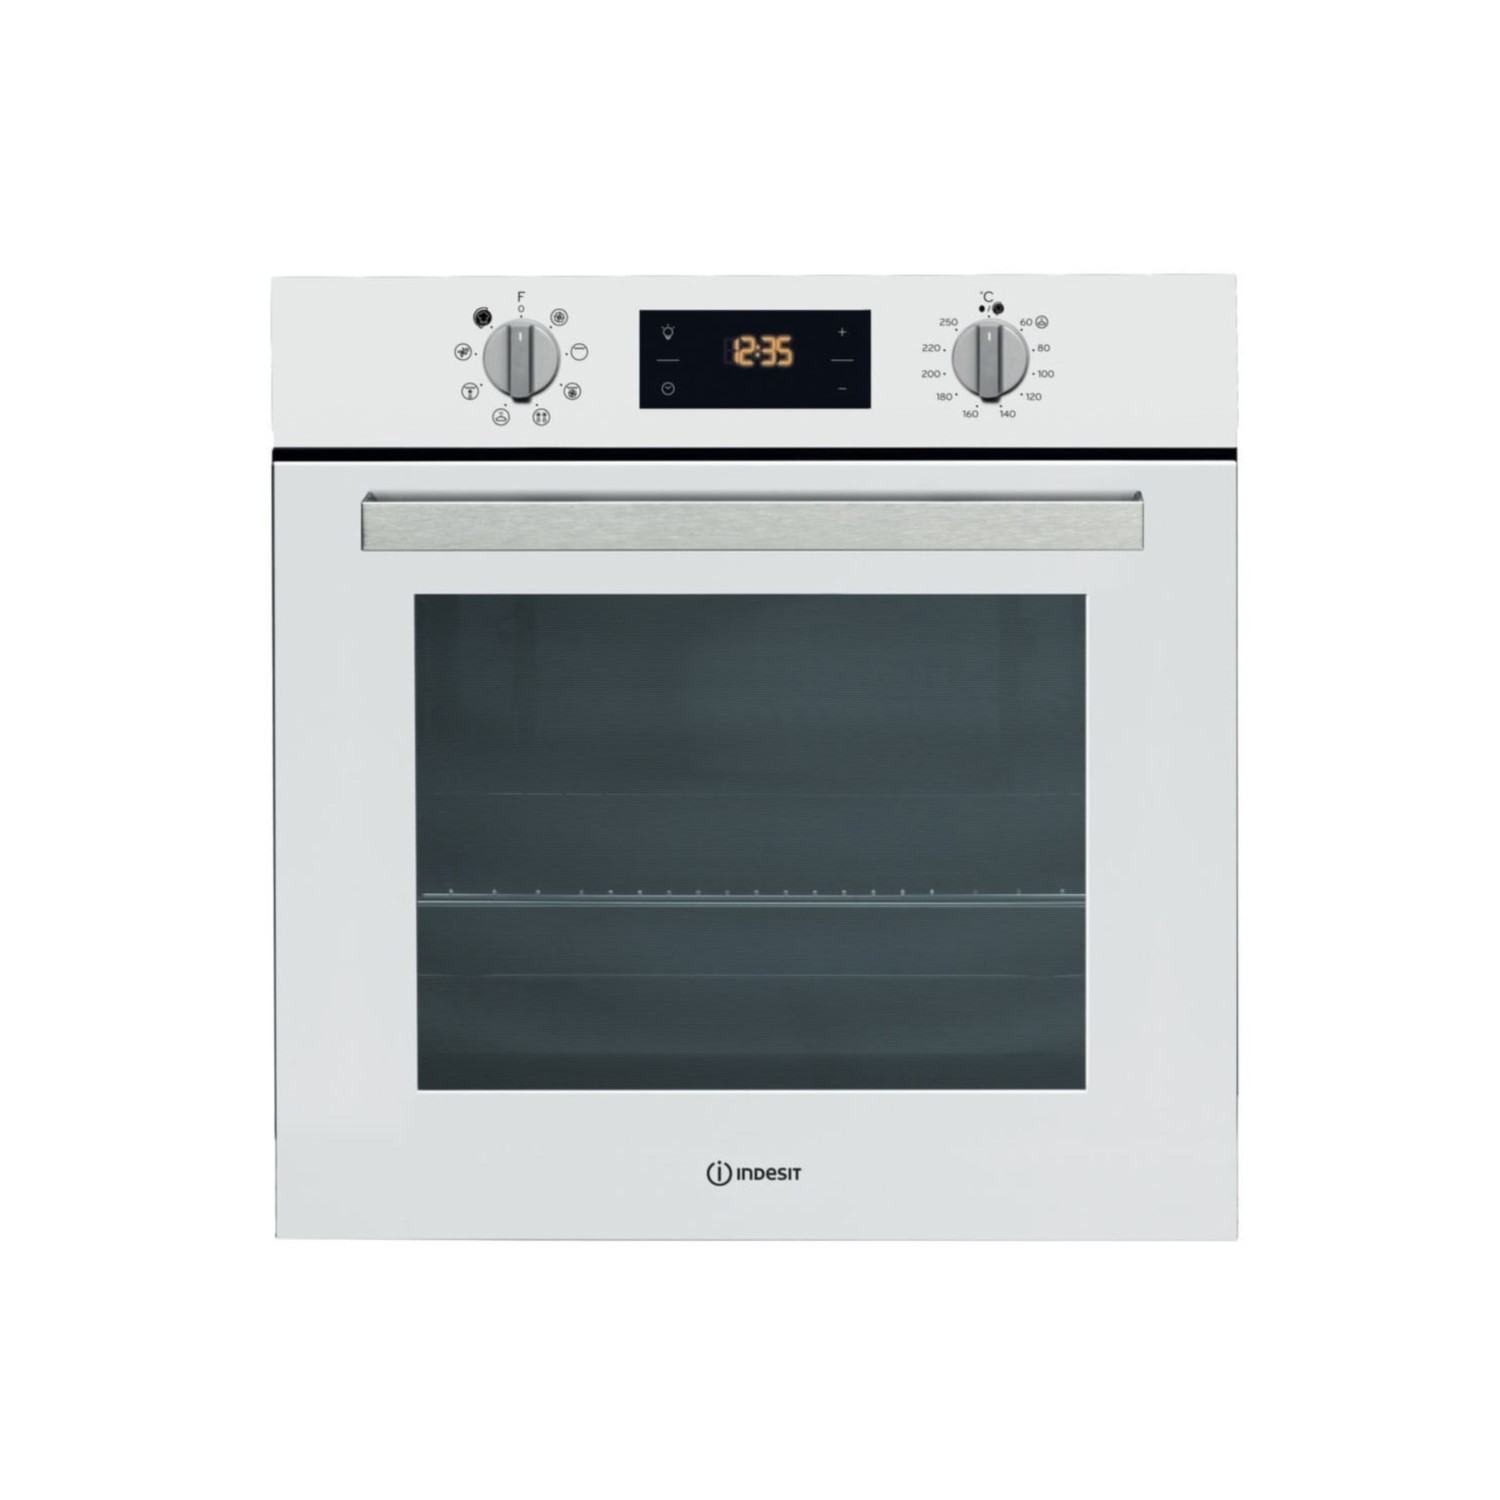 Refurbished Indesit Aria IFW6340WHUK 60cm Single Built In Electric Oven White